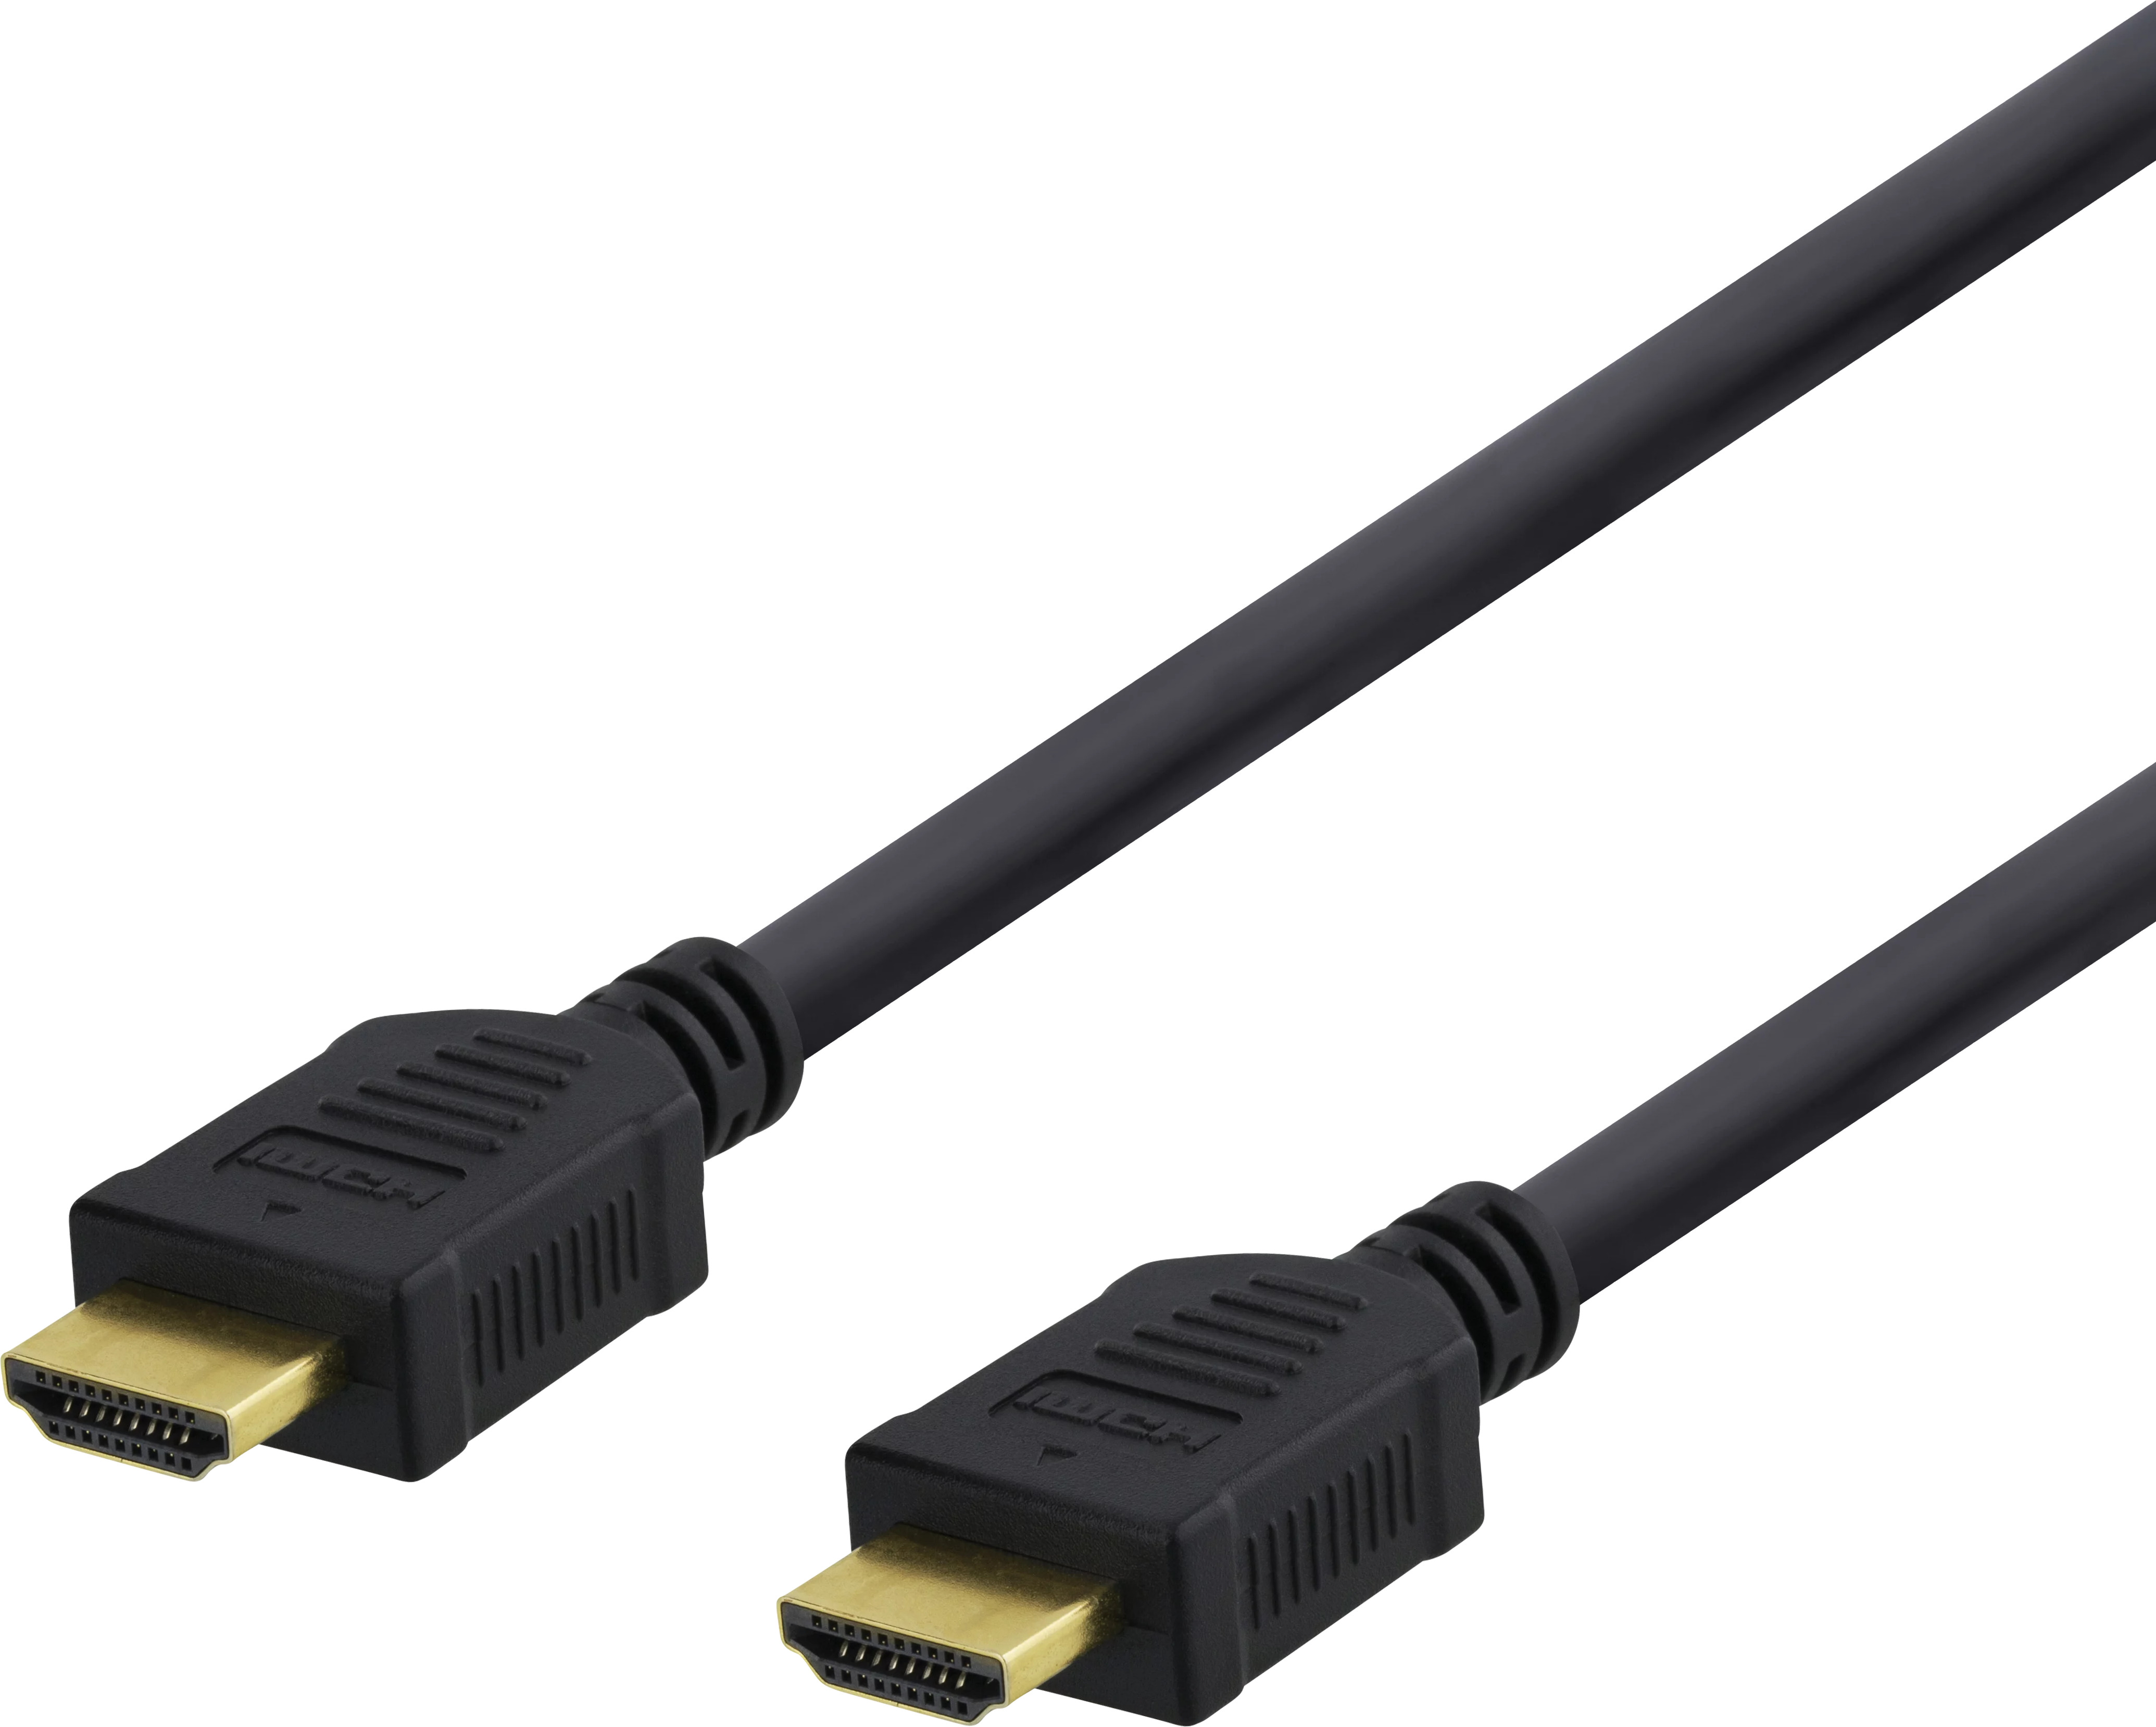 DELTACO HDMI cable Highspeed Premium HDMI1015D w/Ethernet, 4K UHD,1.5m, Bl.